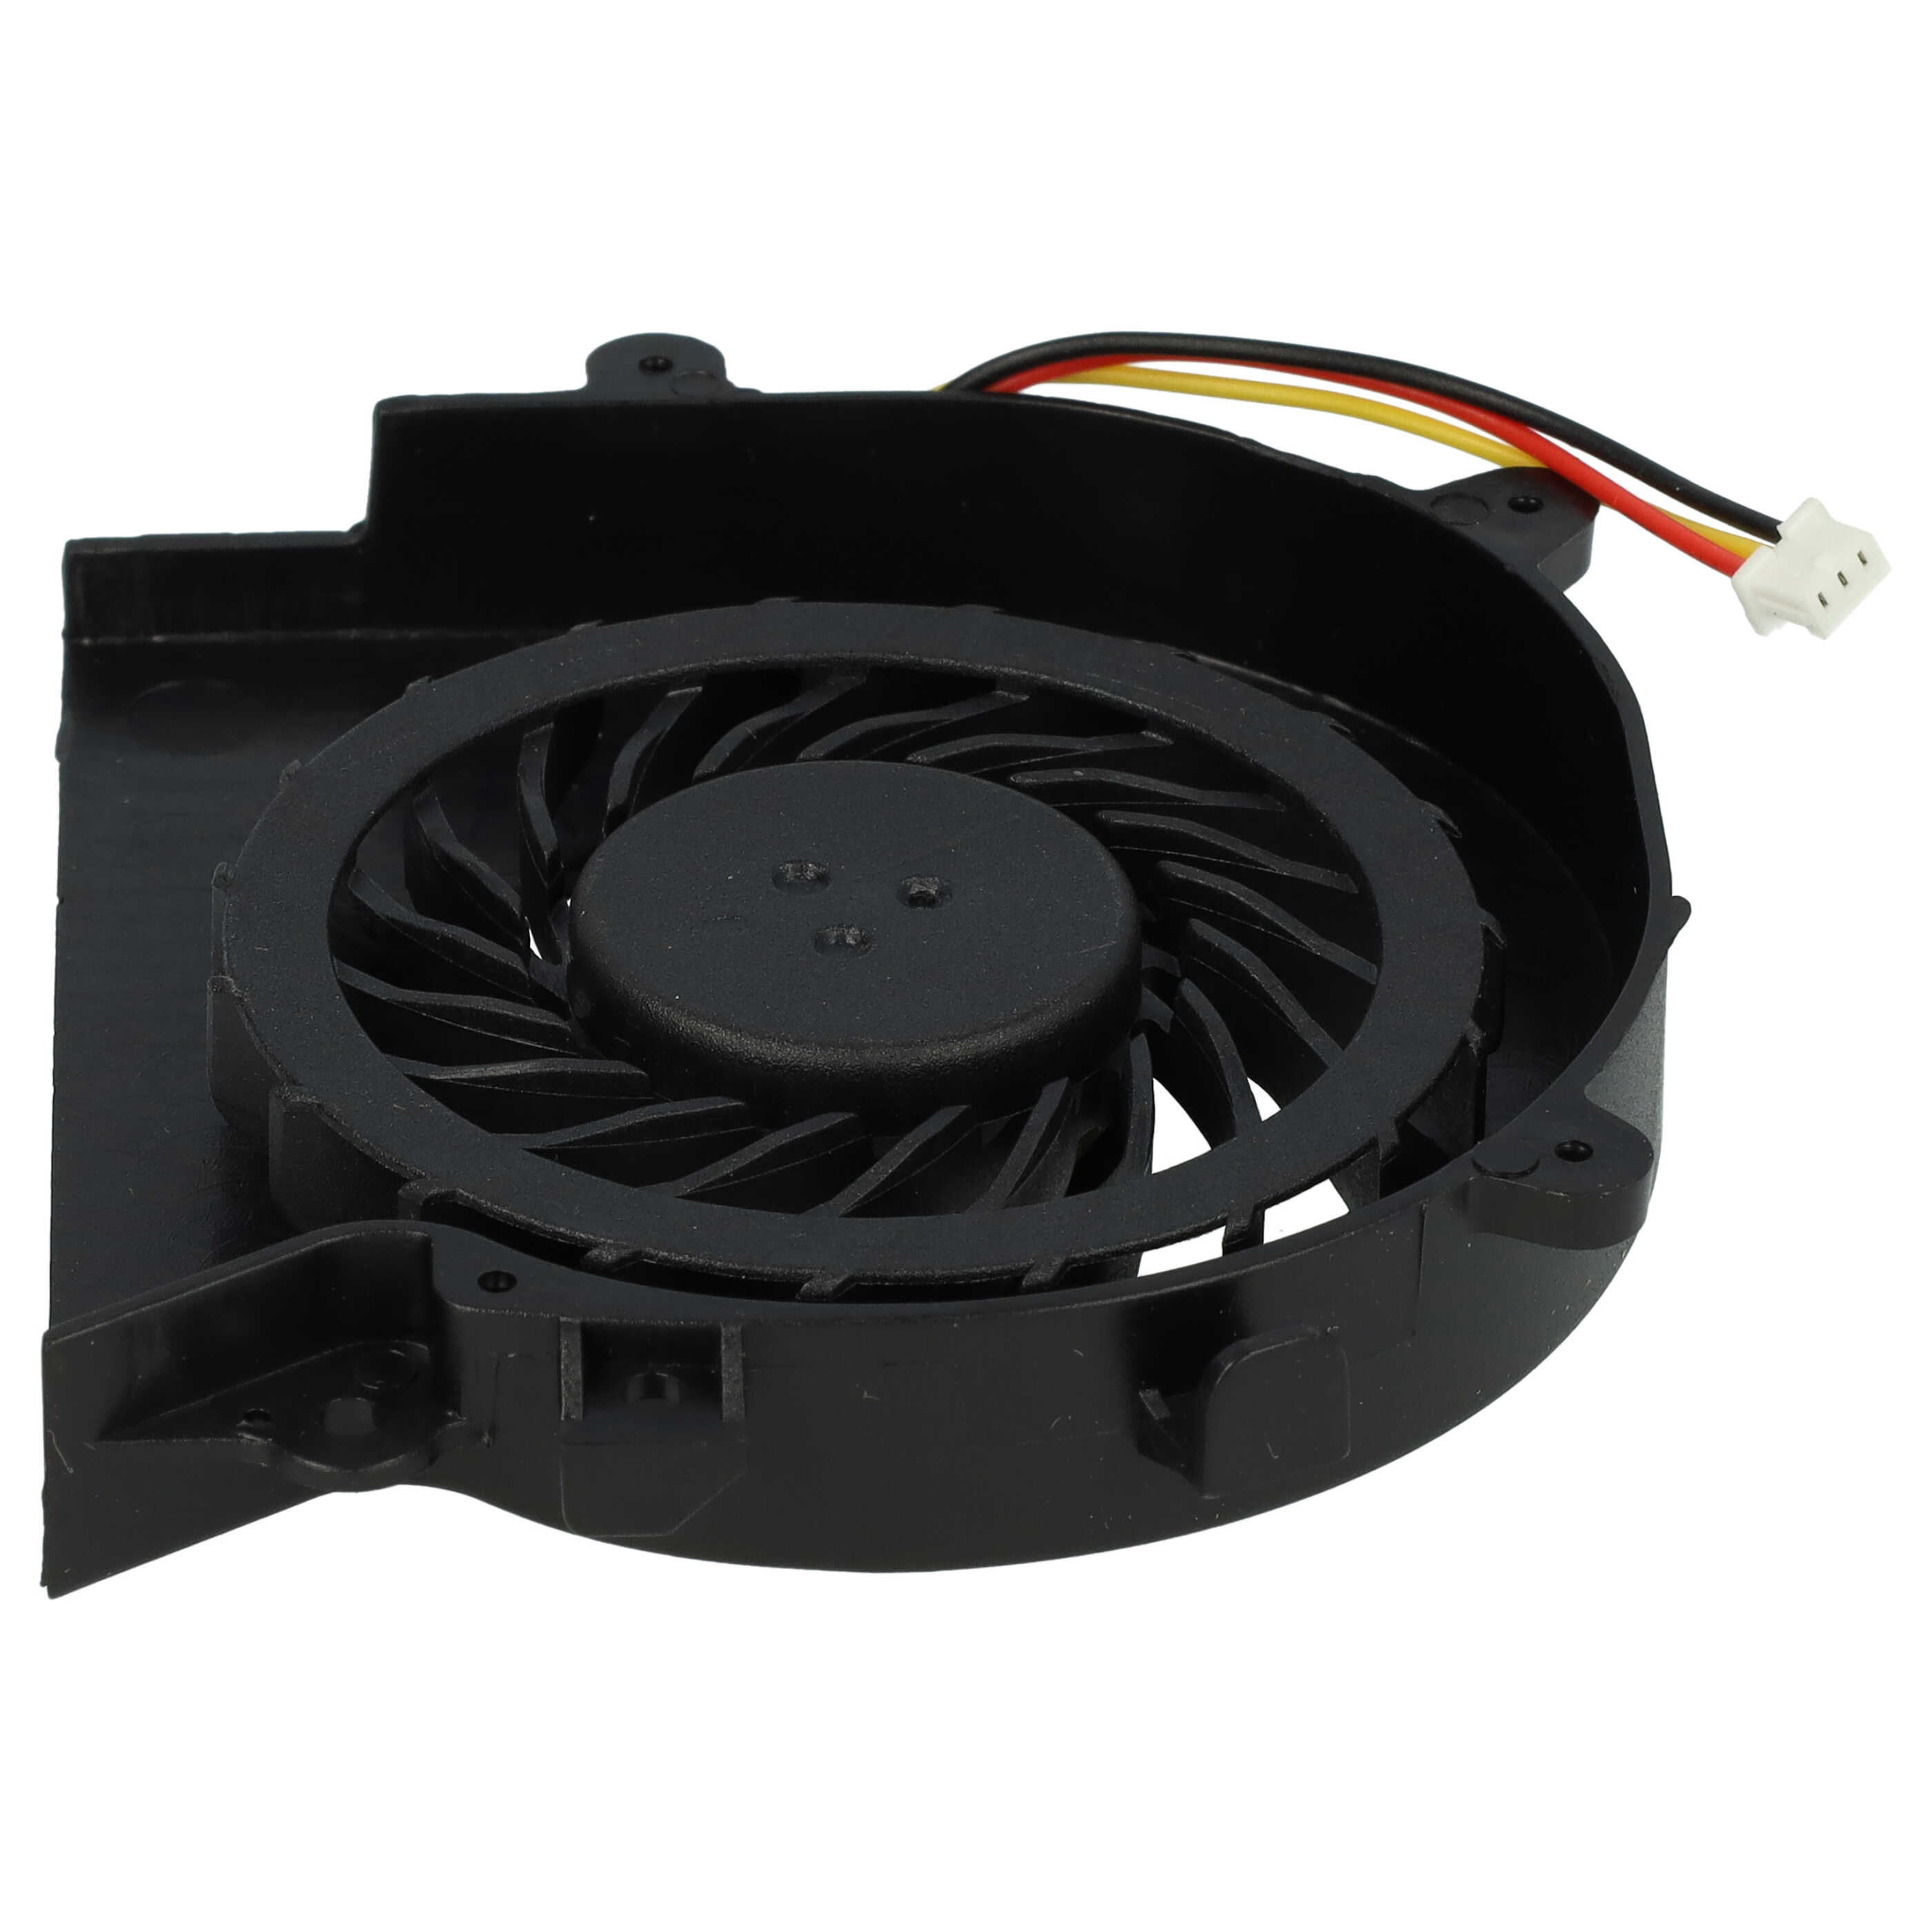 CPU / GPU Fan suitable for Sony Vaio VPC-EA1S1E/L Notebook 79 x 66 x 12 mm